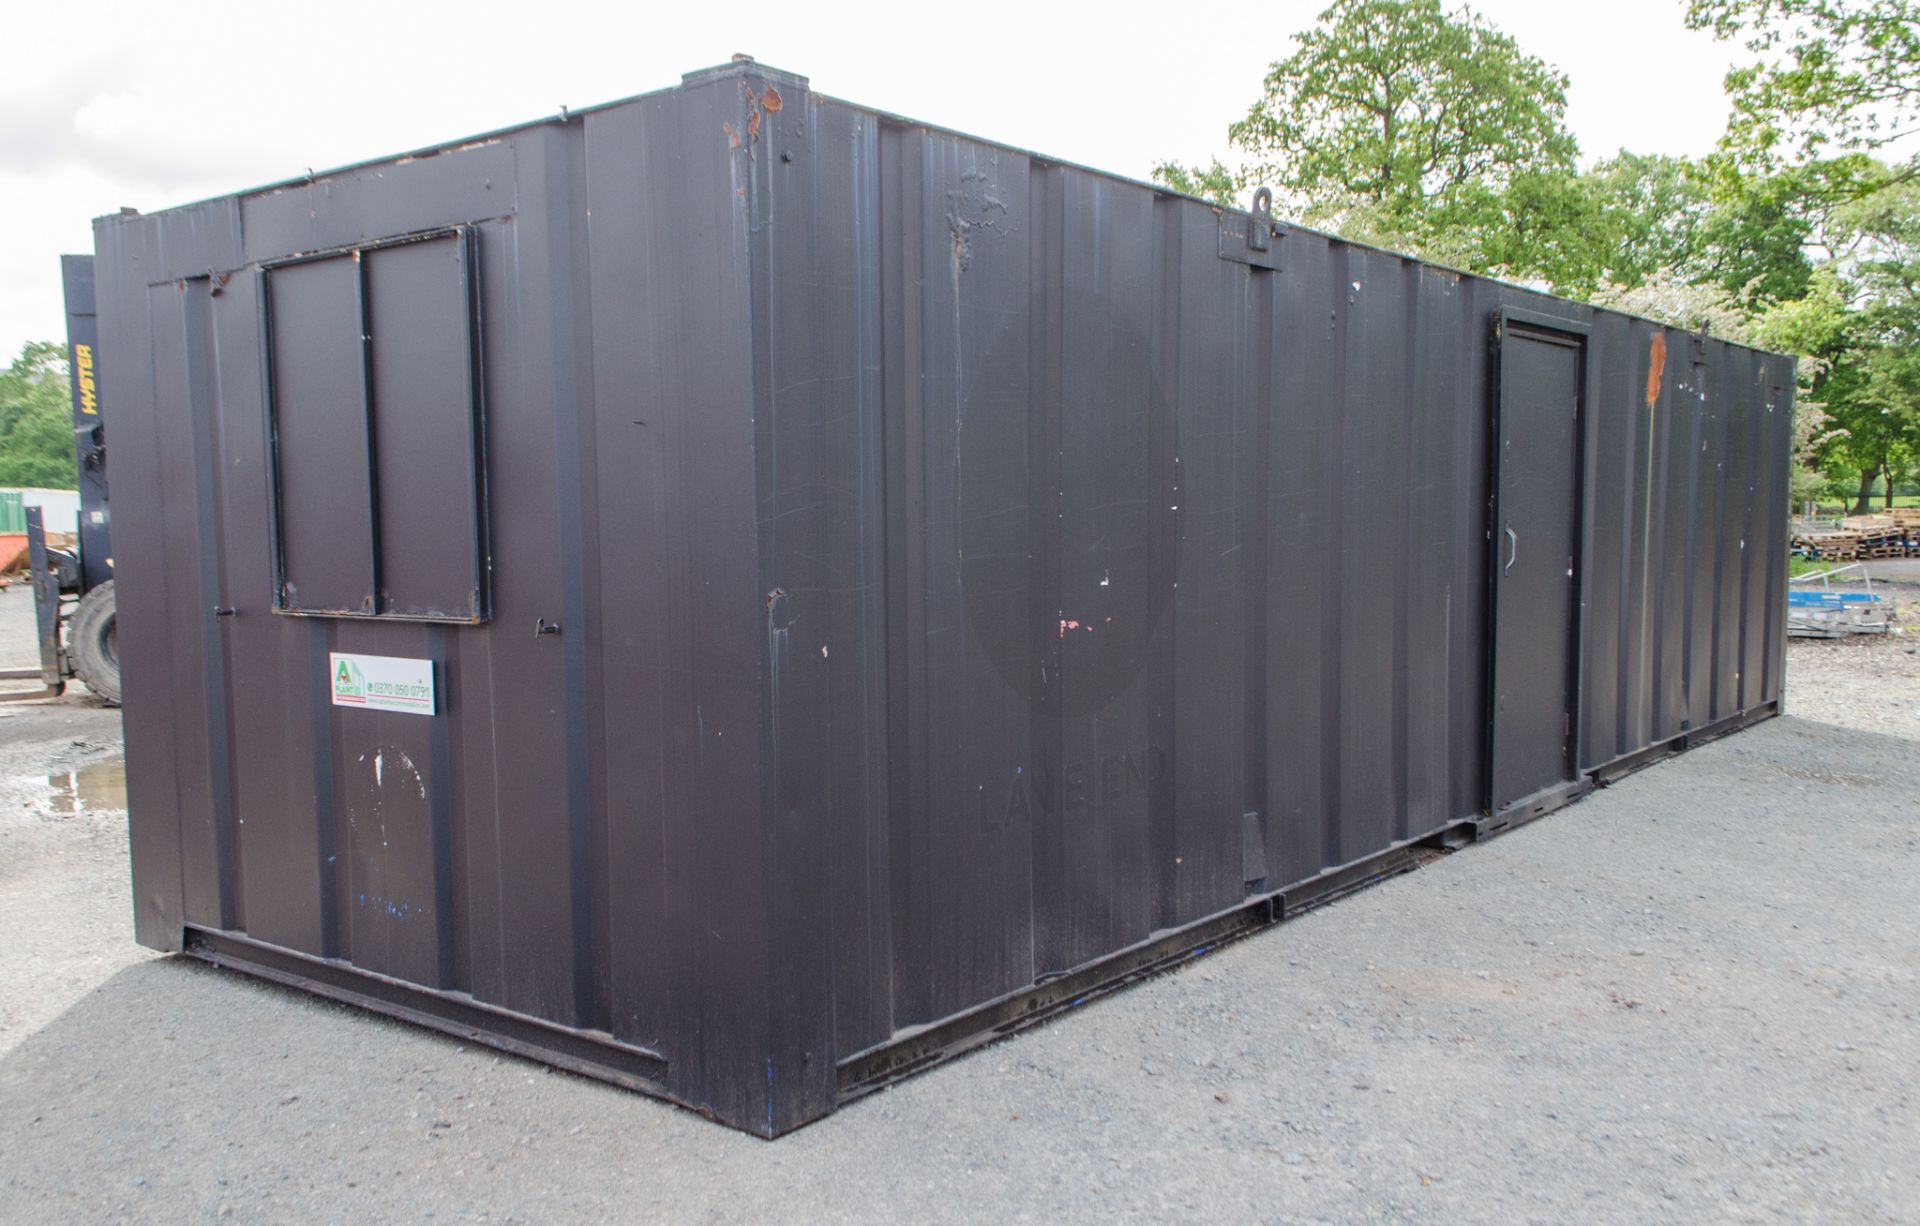 32 ft x 10 ft steel anti vandal office/changing area site unit A437607 ** No keys but open ** - Image 4 of 6